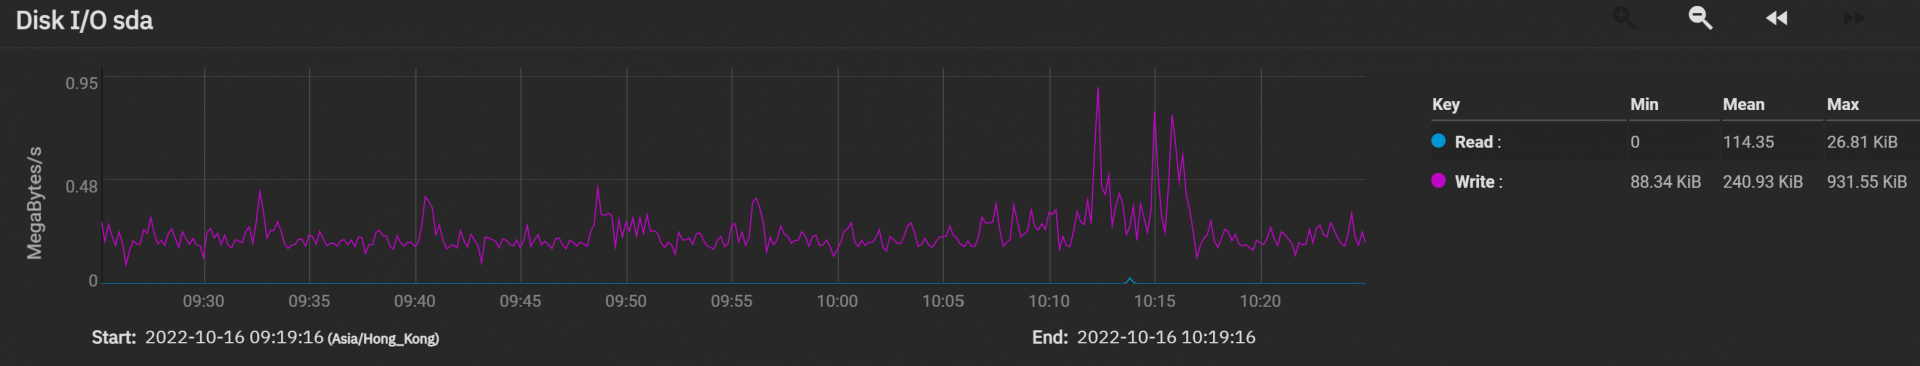 disk_io_graph.png